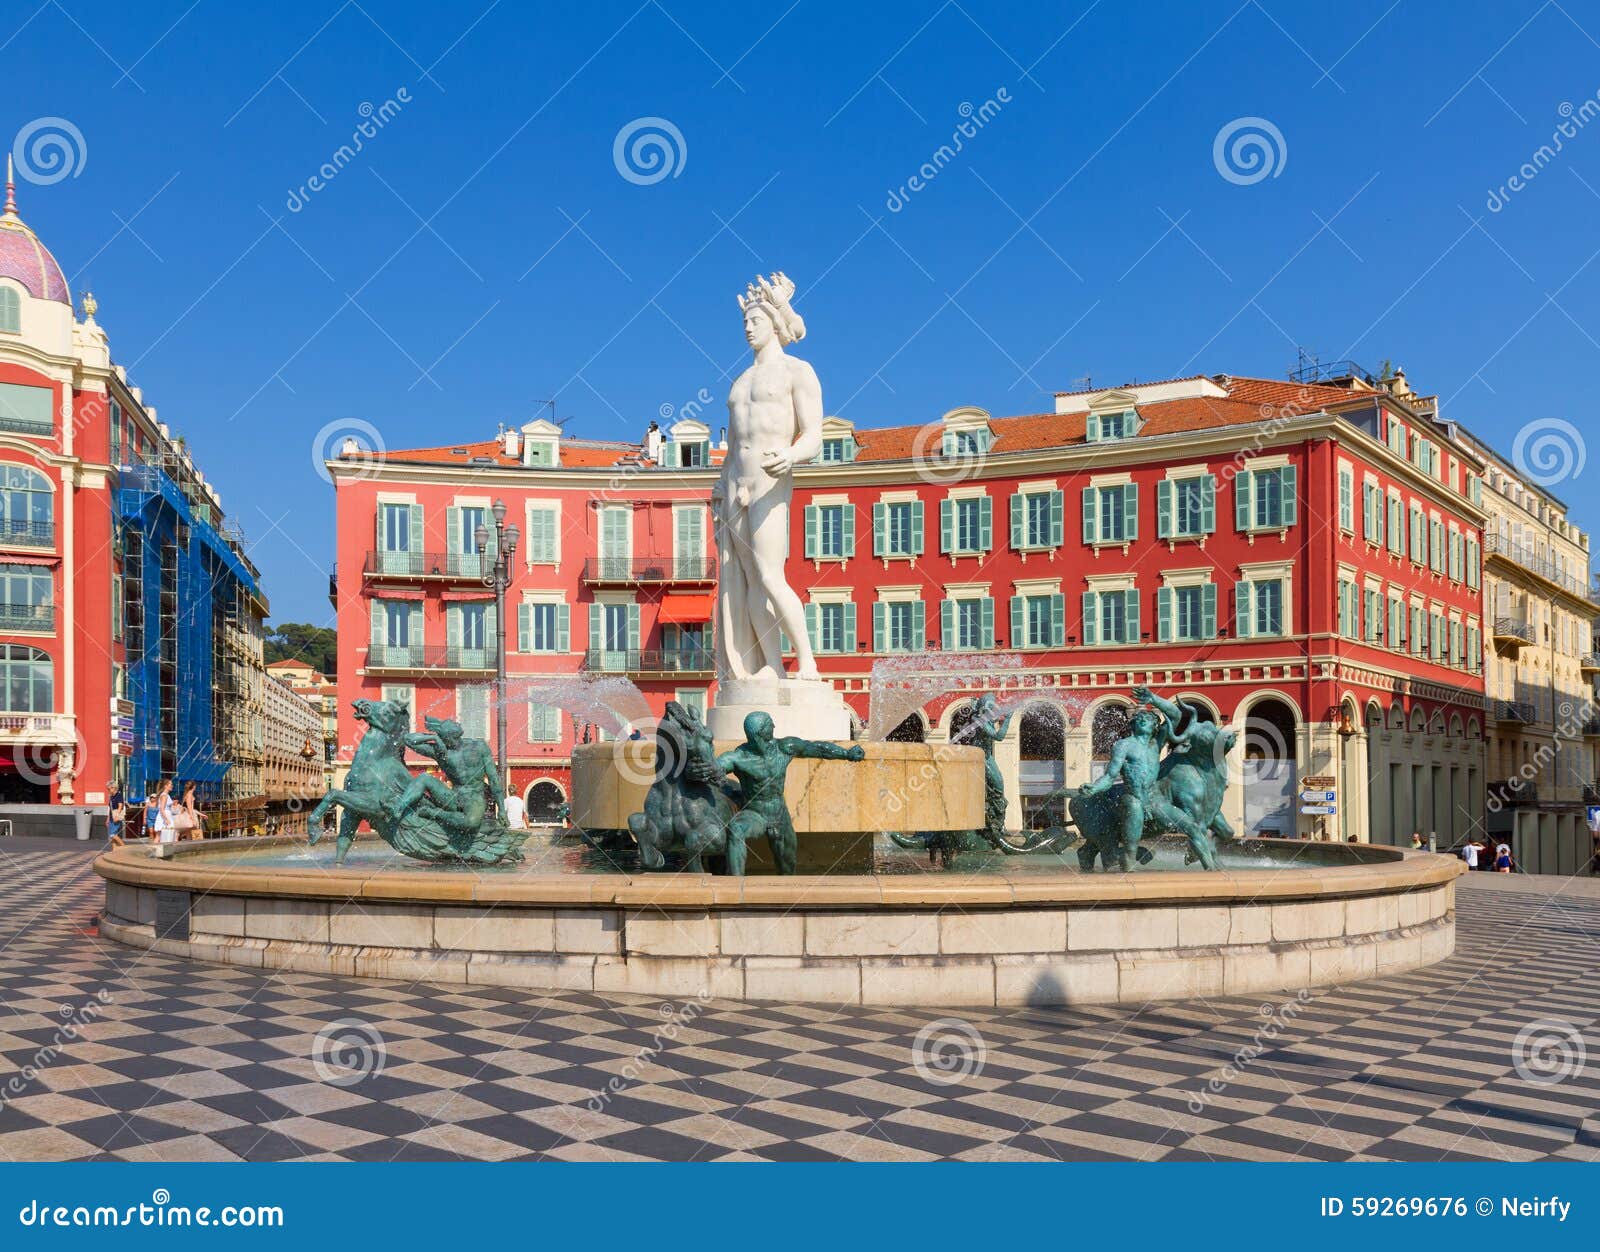 old town of nice, france